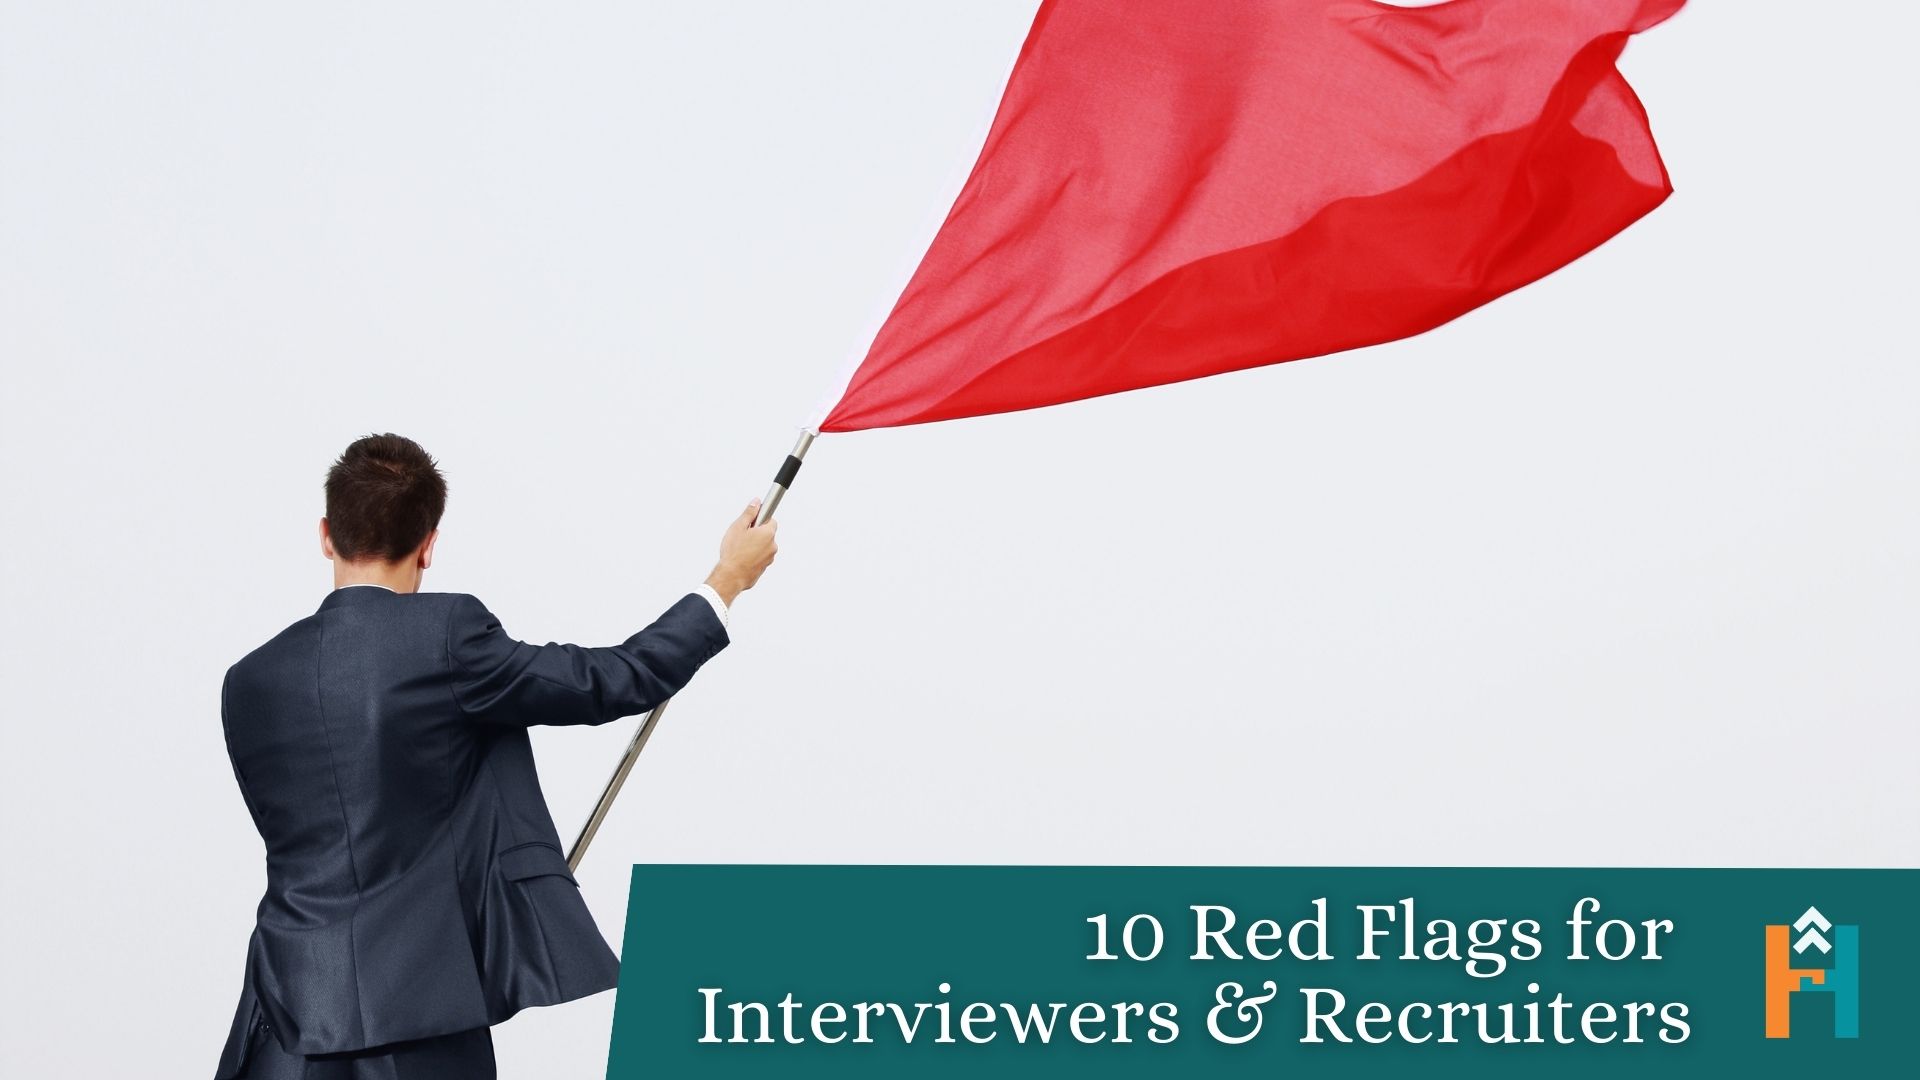 10 Red Flags for Interviewers and Recruiters